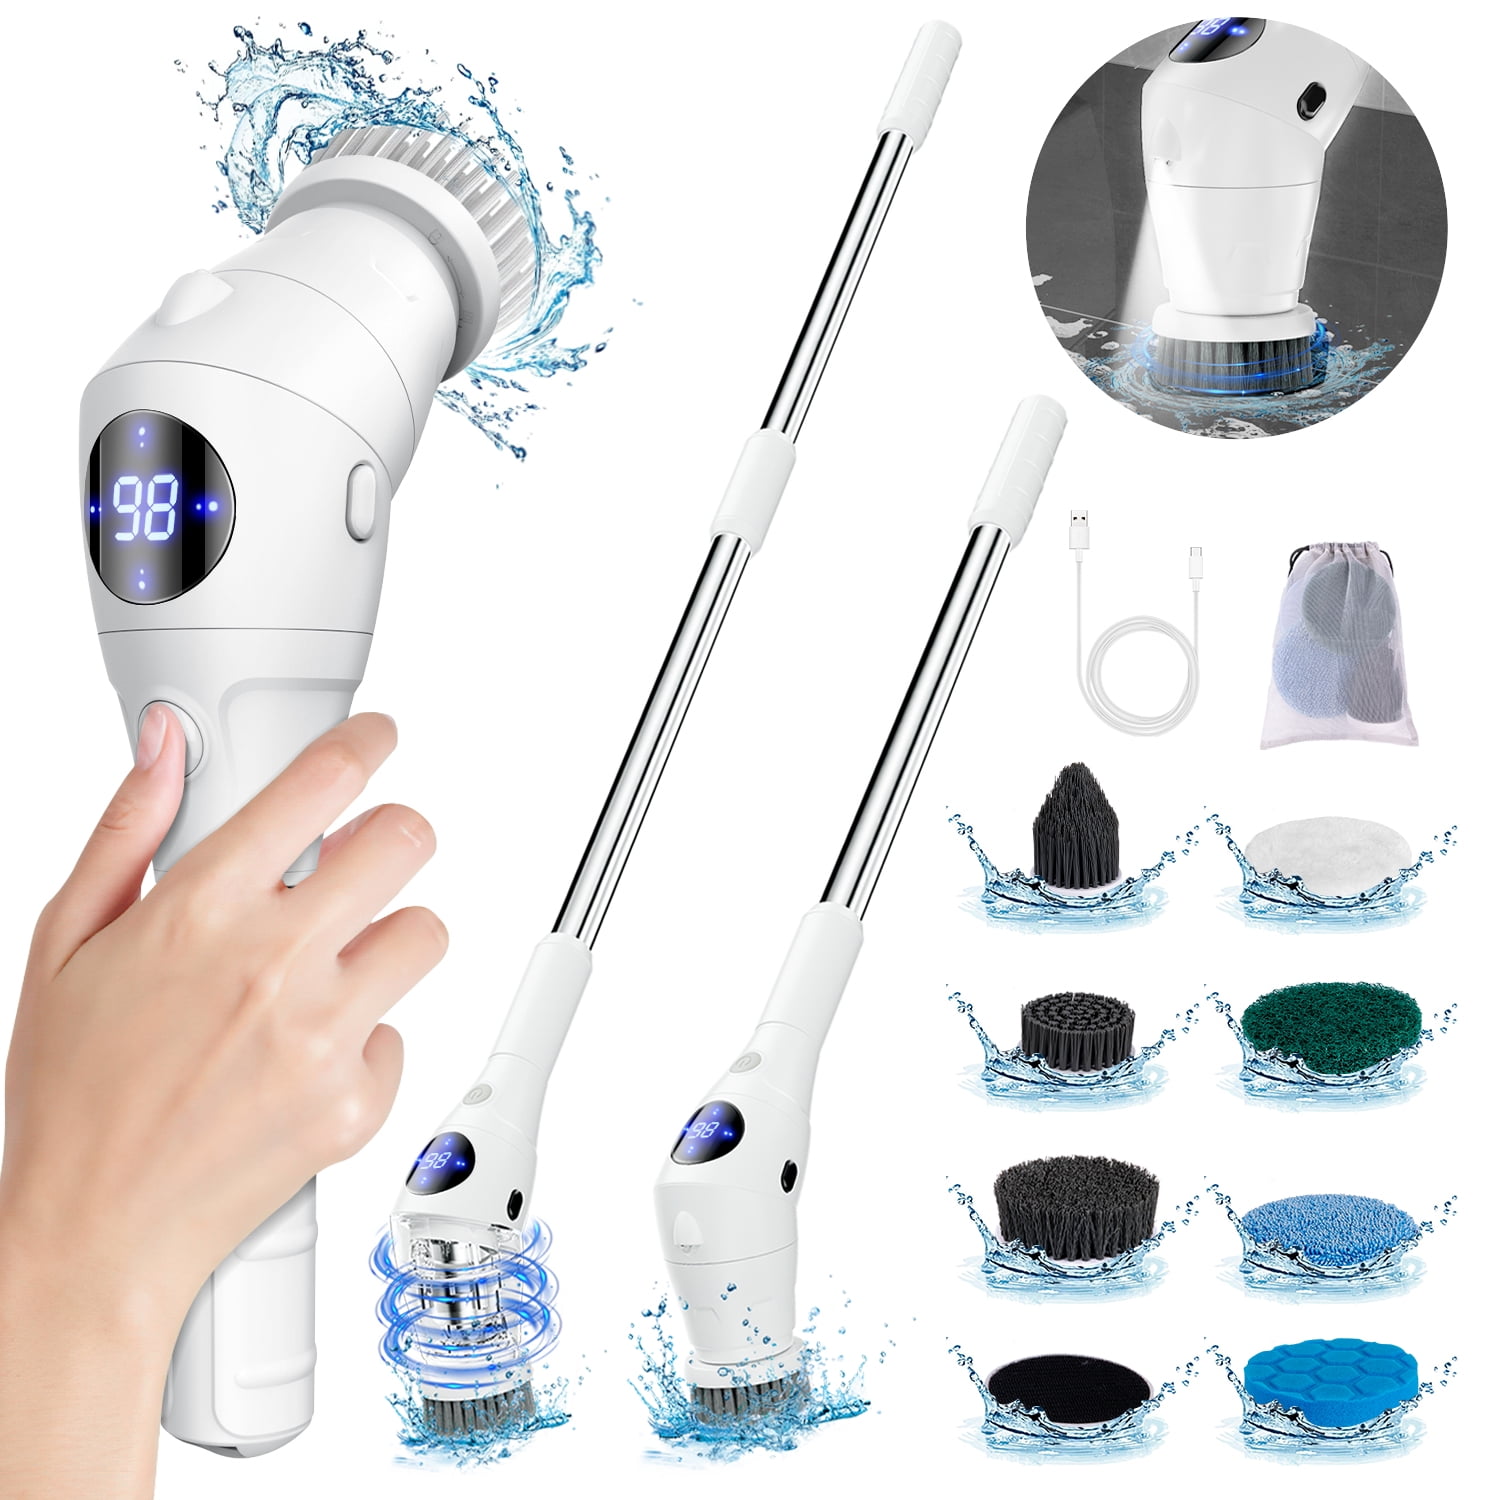 Electric Spin Scrubber - Cleaning Brush with Led Lighting, Cordless Power  Scrubber with 8 Replaceable Brush Heads, Adjustable Handle Shower Scrubber